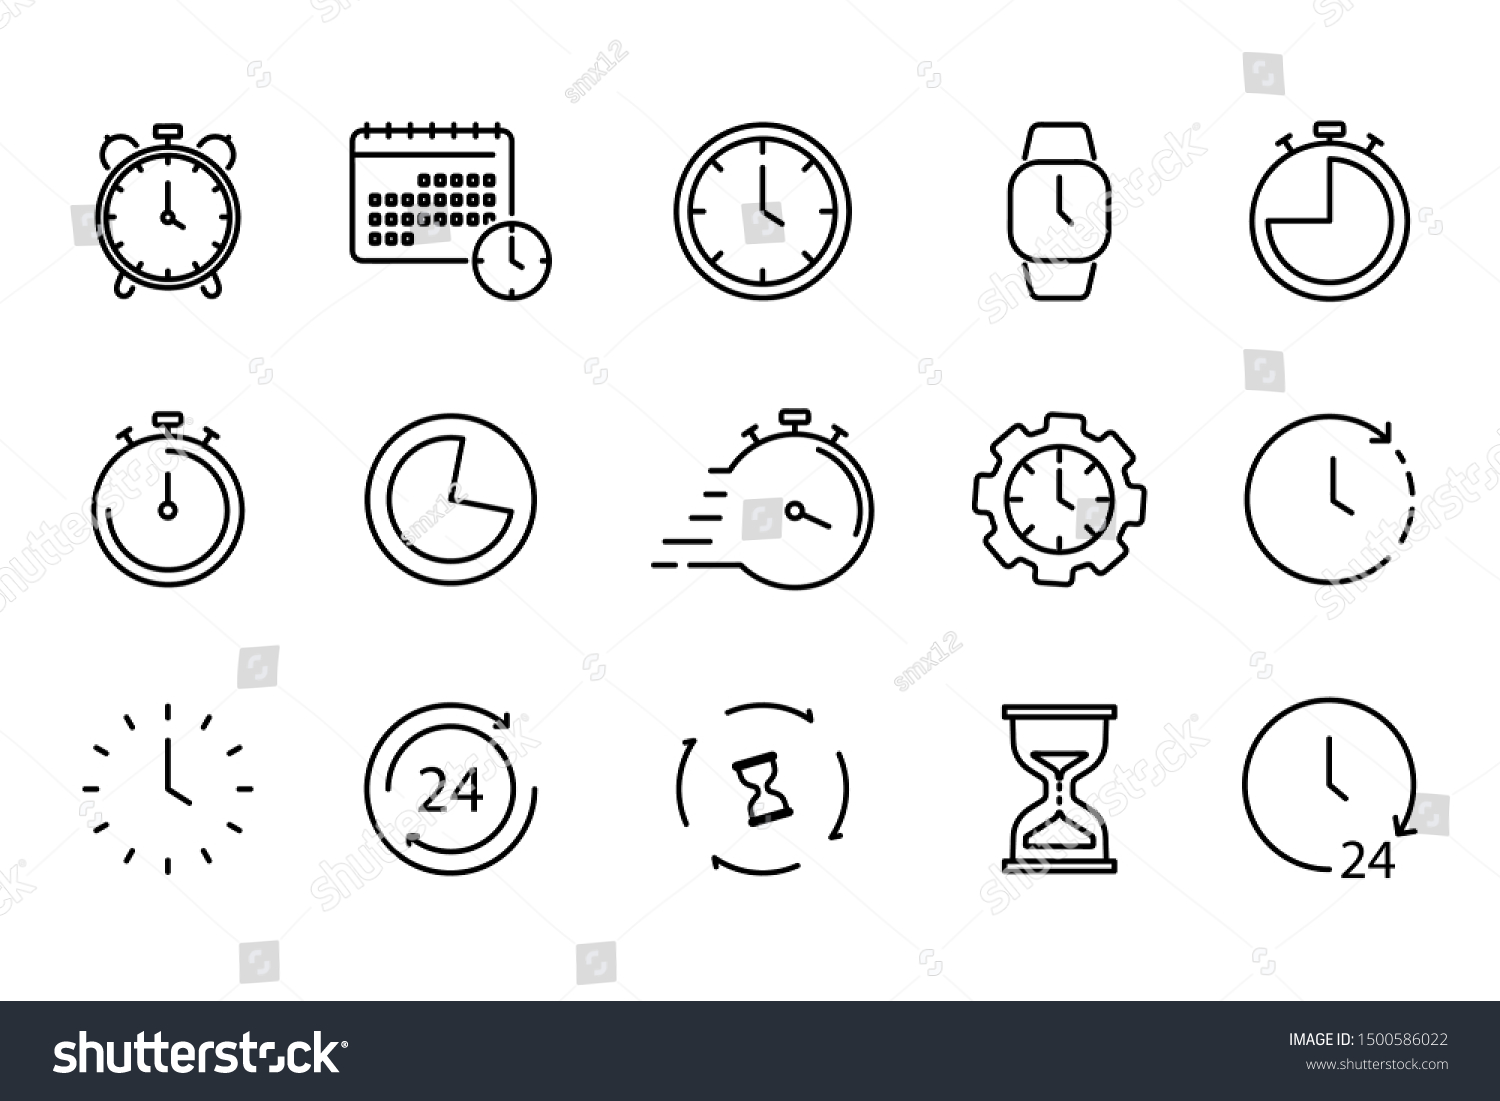 Time and Clock set of linear icons. Time management. Timer, Speed, Alarm, Restore, Time Management, Calendar and more. Collection of time, clock, watch, timer vector simple outline icons for web #1500586022